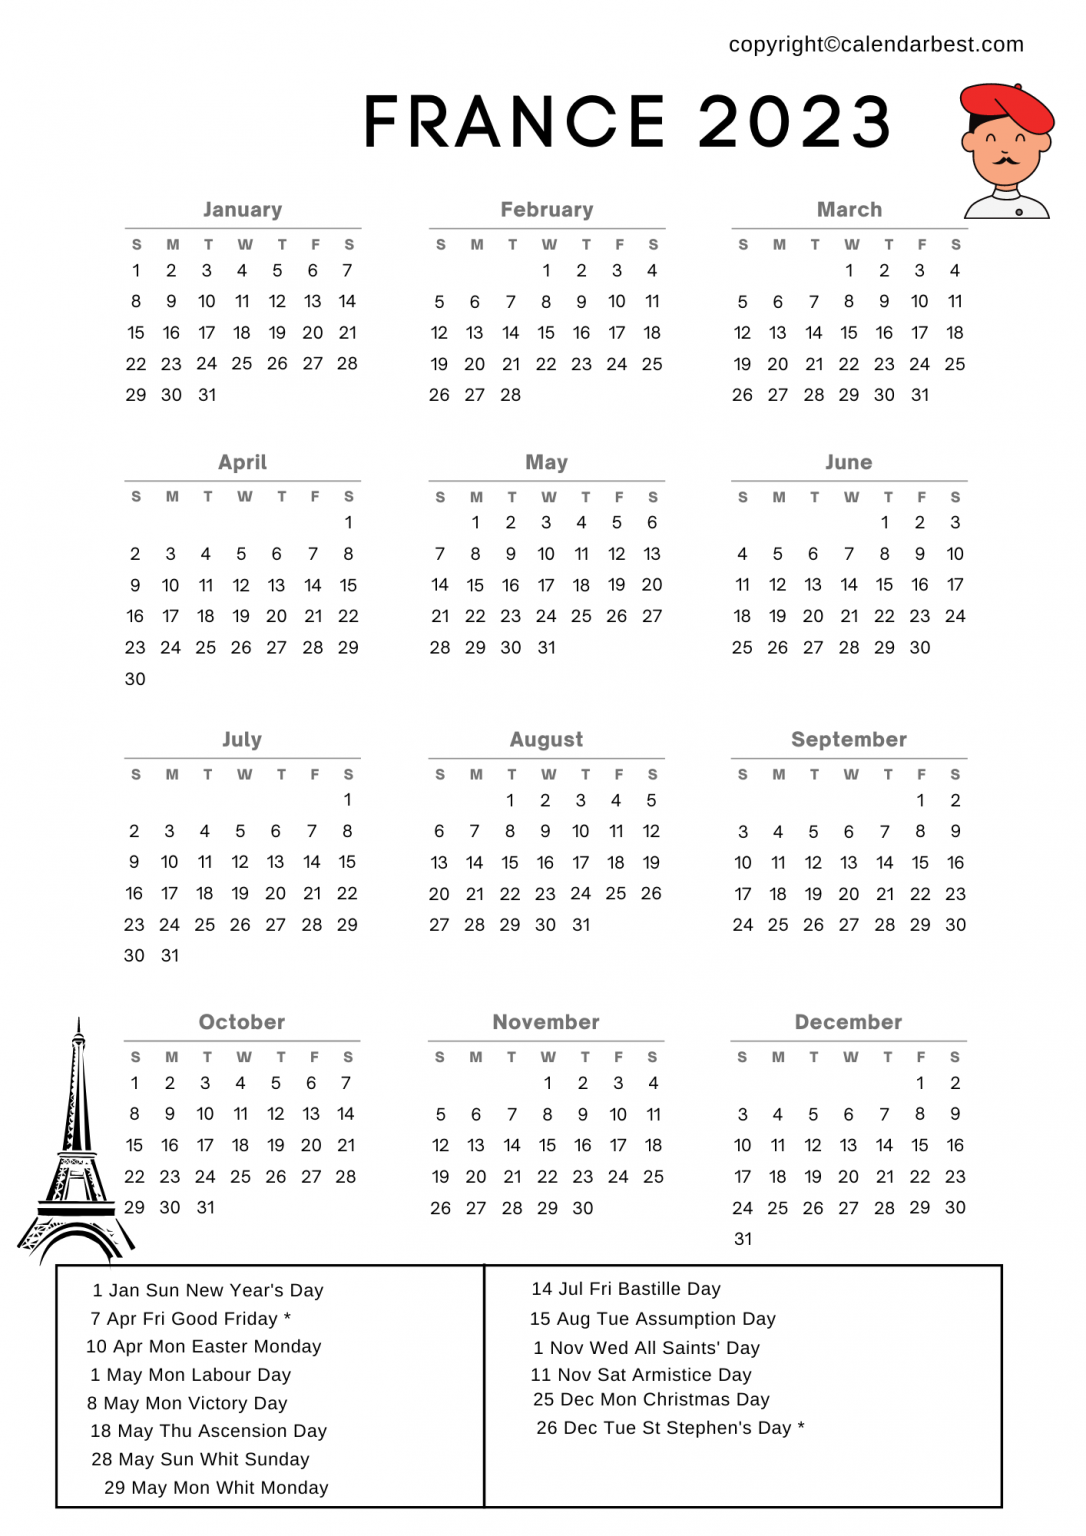 France Calendar 2023 With Holidays Free Printable In PDF